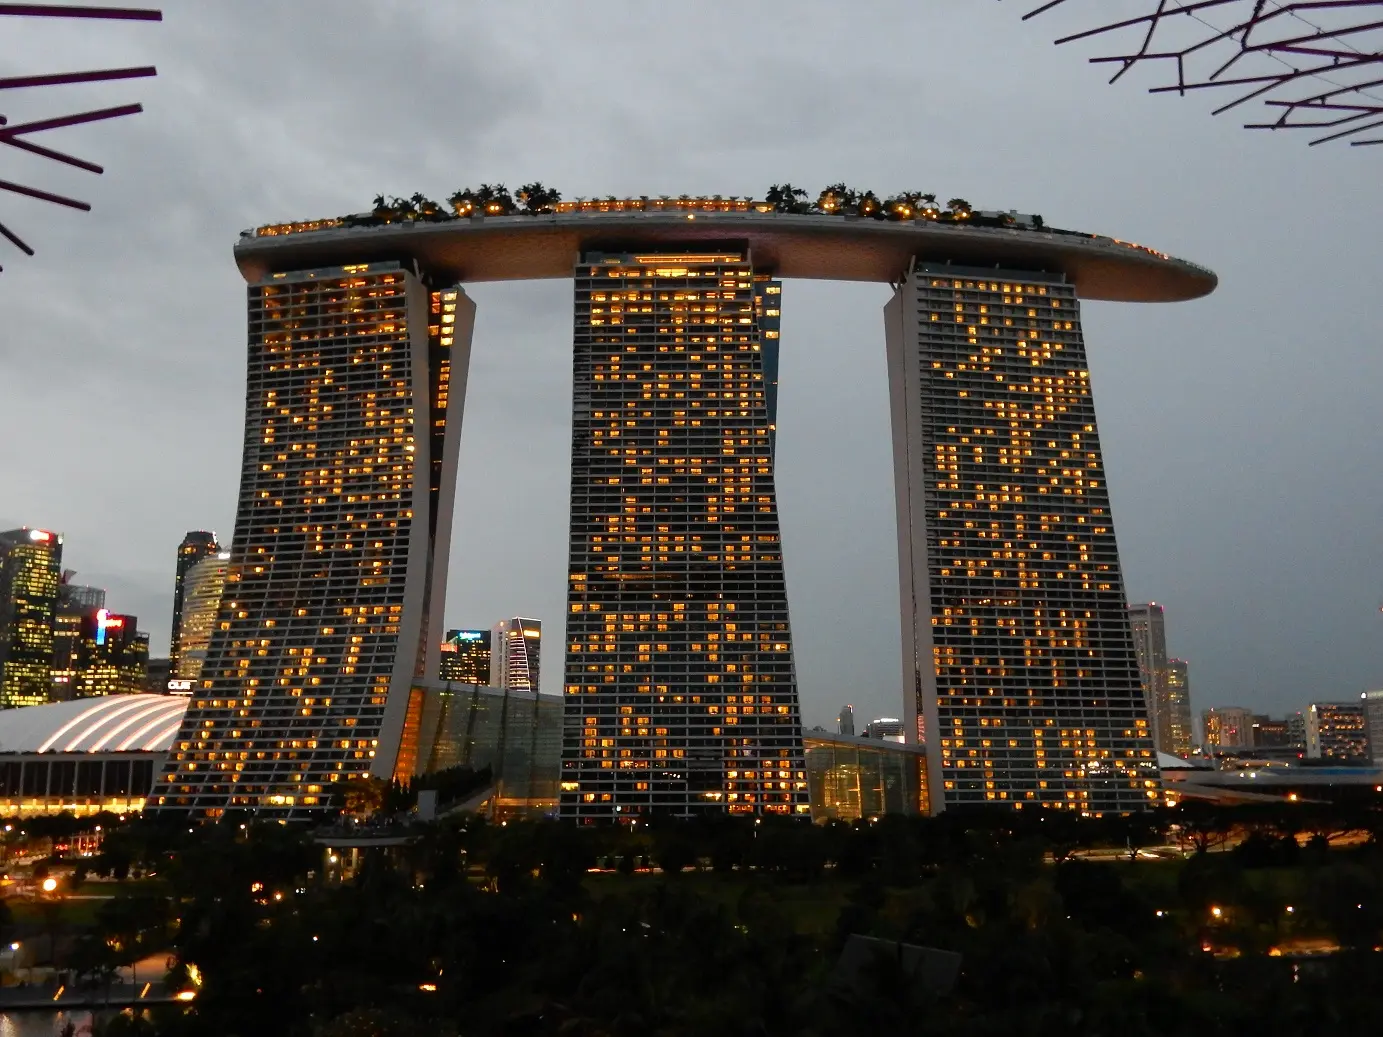 2561 rooms, 57 floors, 920 000 sqm Marina Bay Sands was recognized as a 